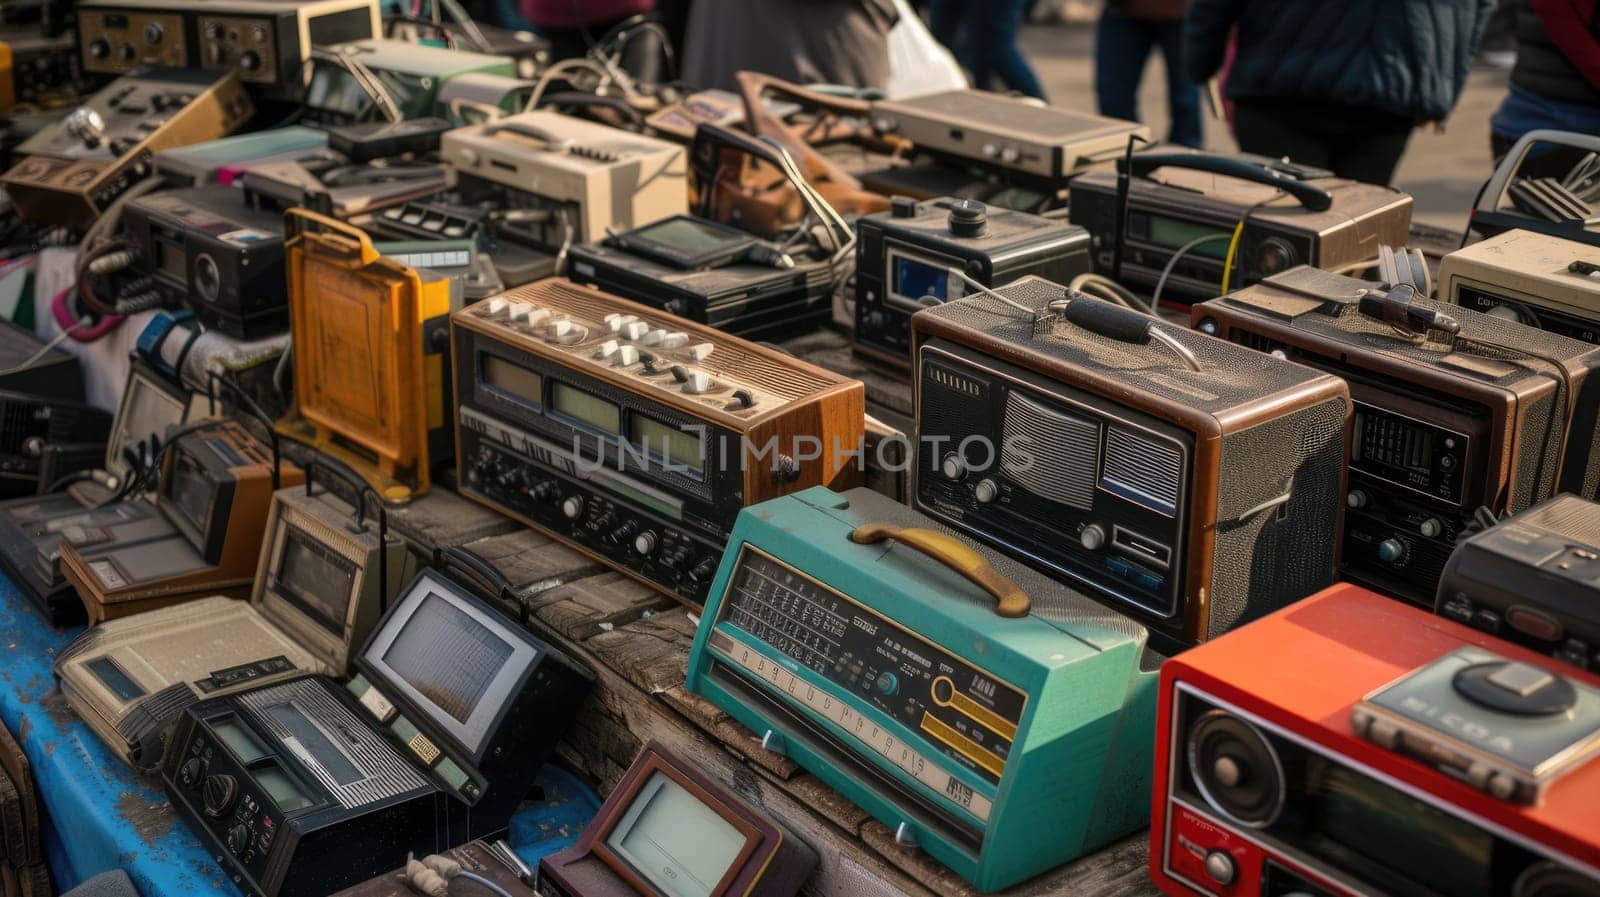 Vintage radios and televisions displayed on a table in an engineering event AIG41 by biancoblue